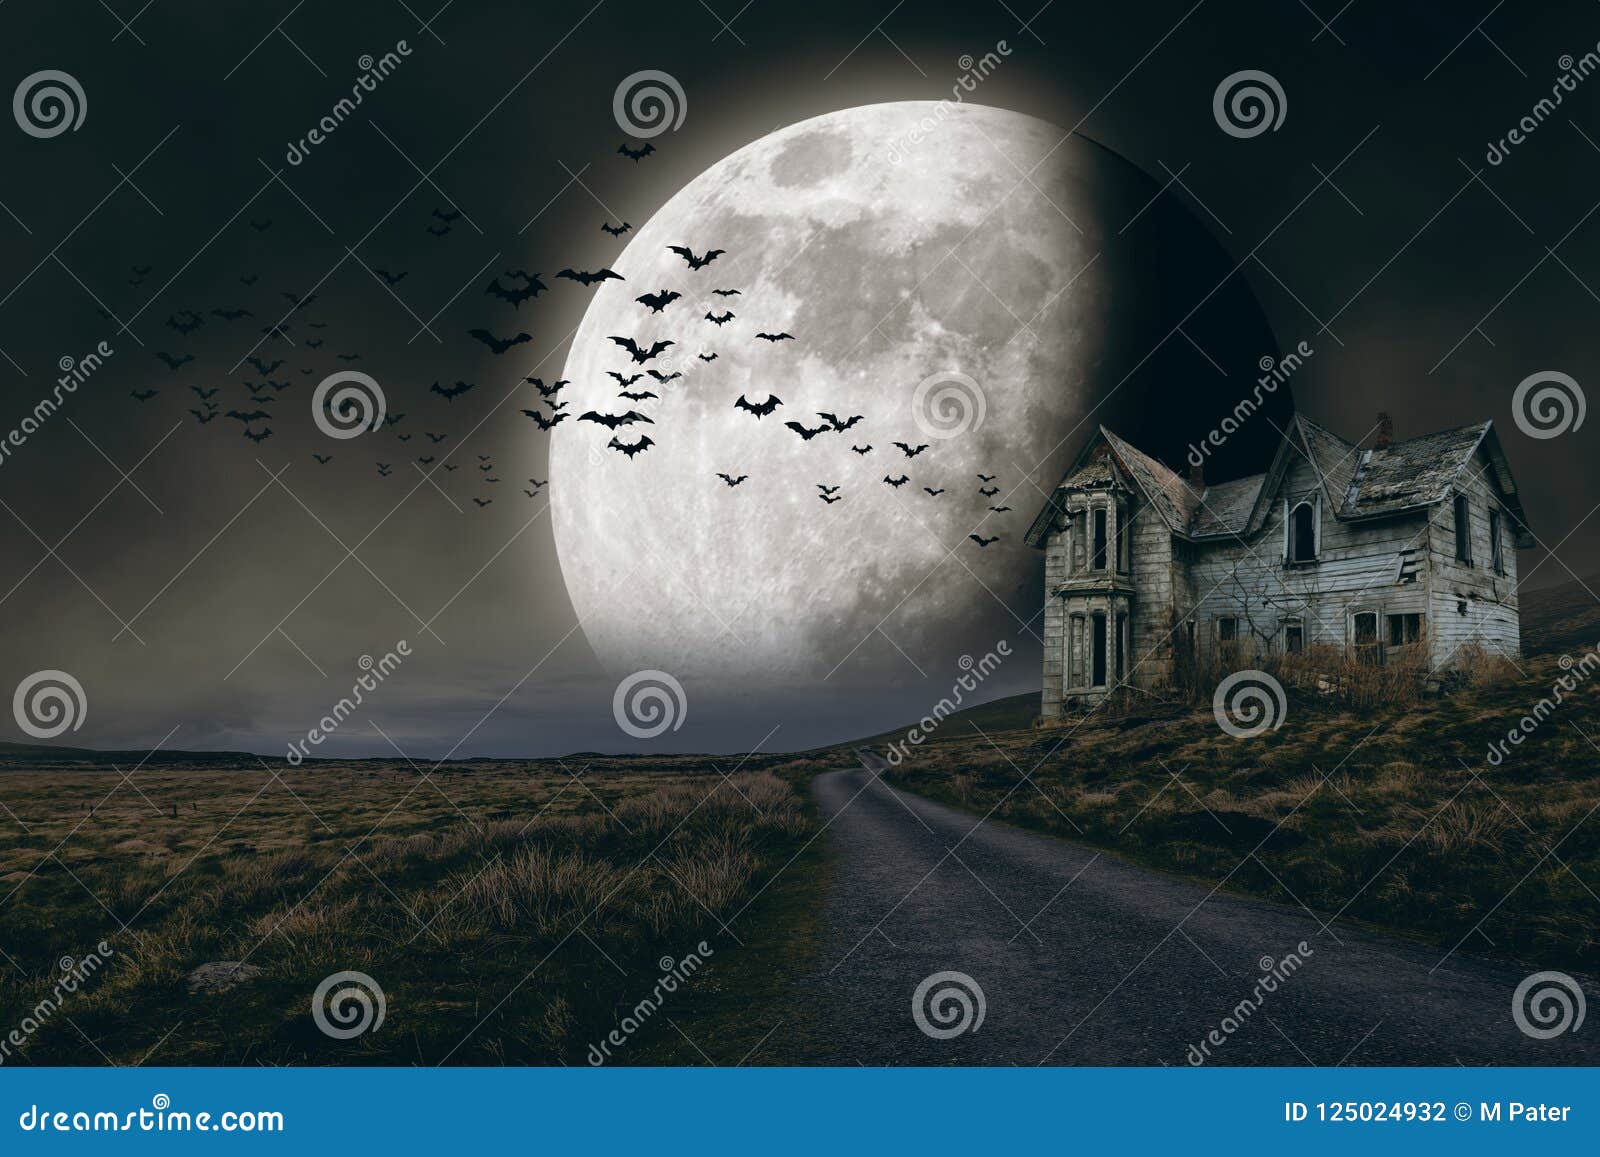 halloween background with full moon and creepy house